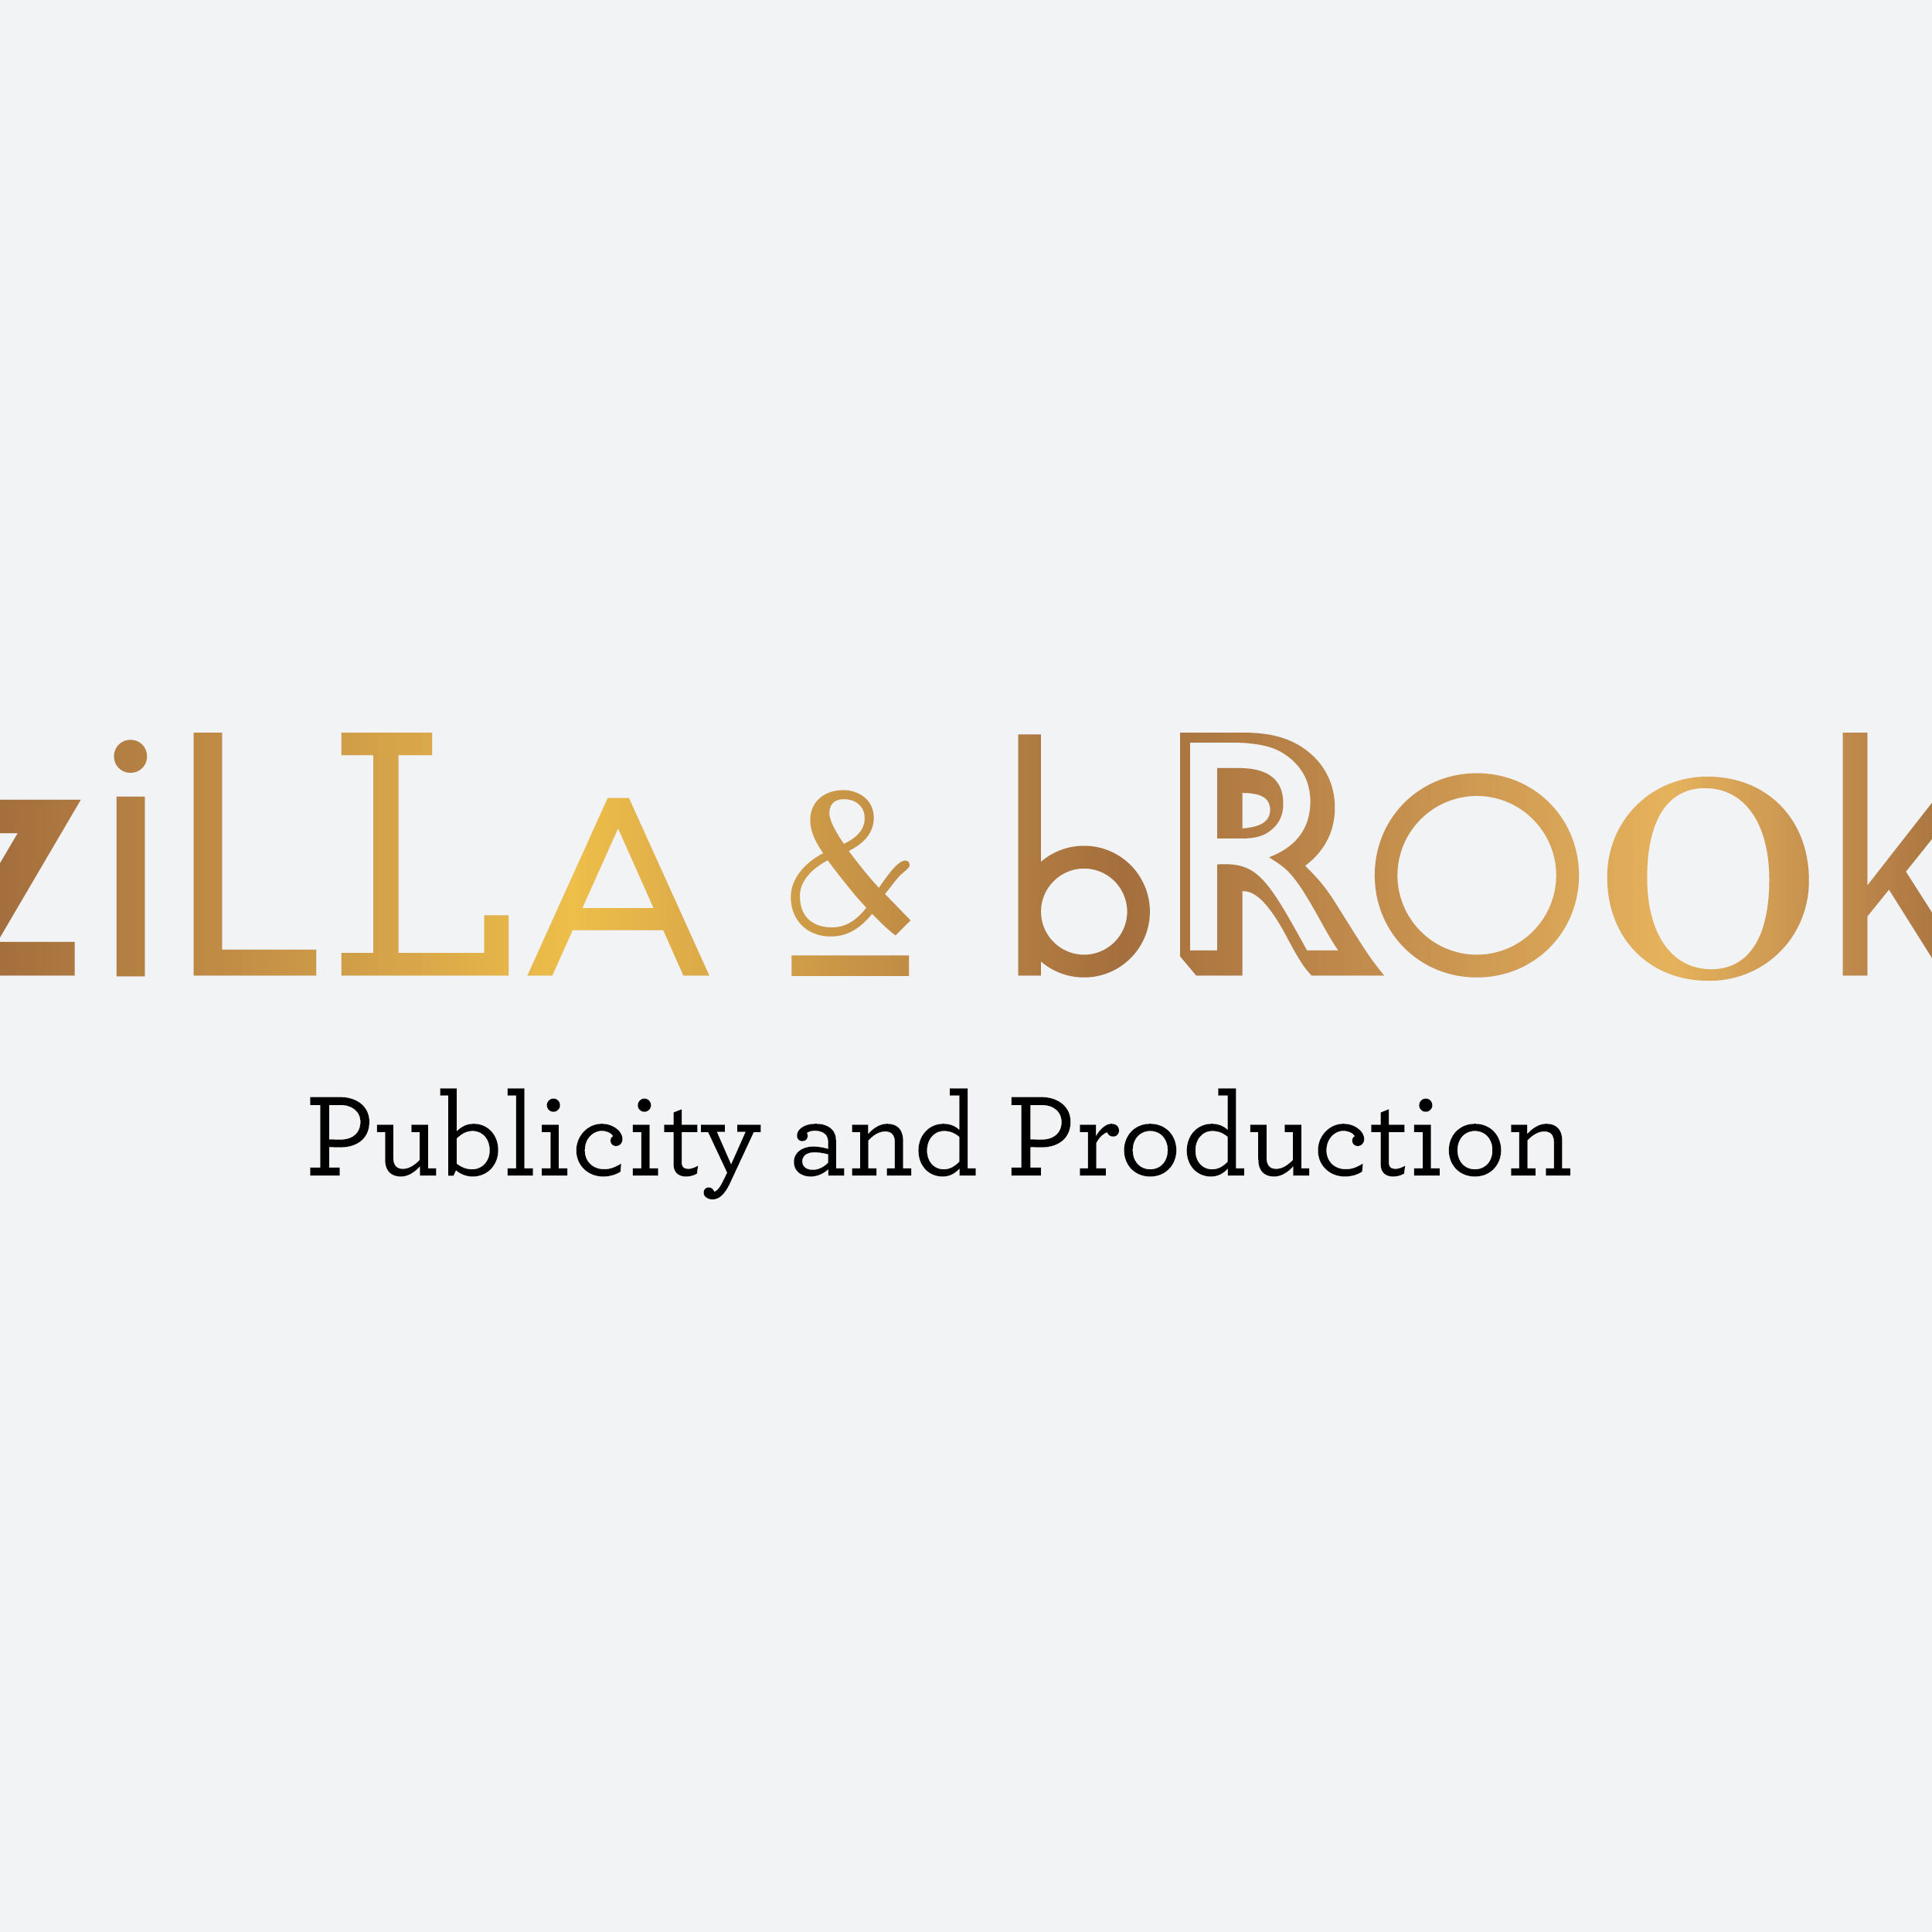 ZILLA & BROOK Promo image for web